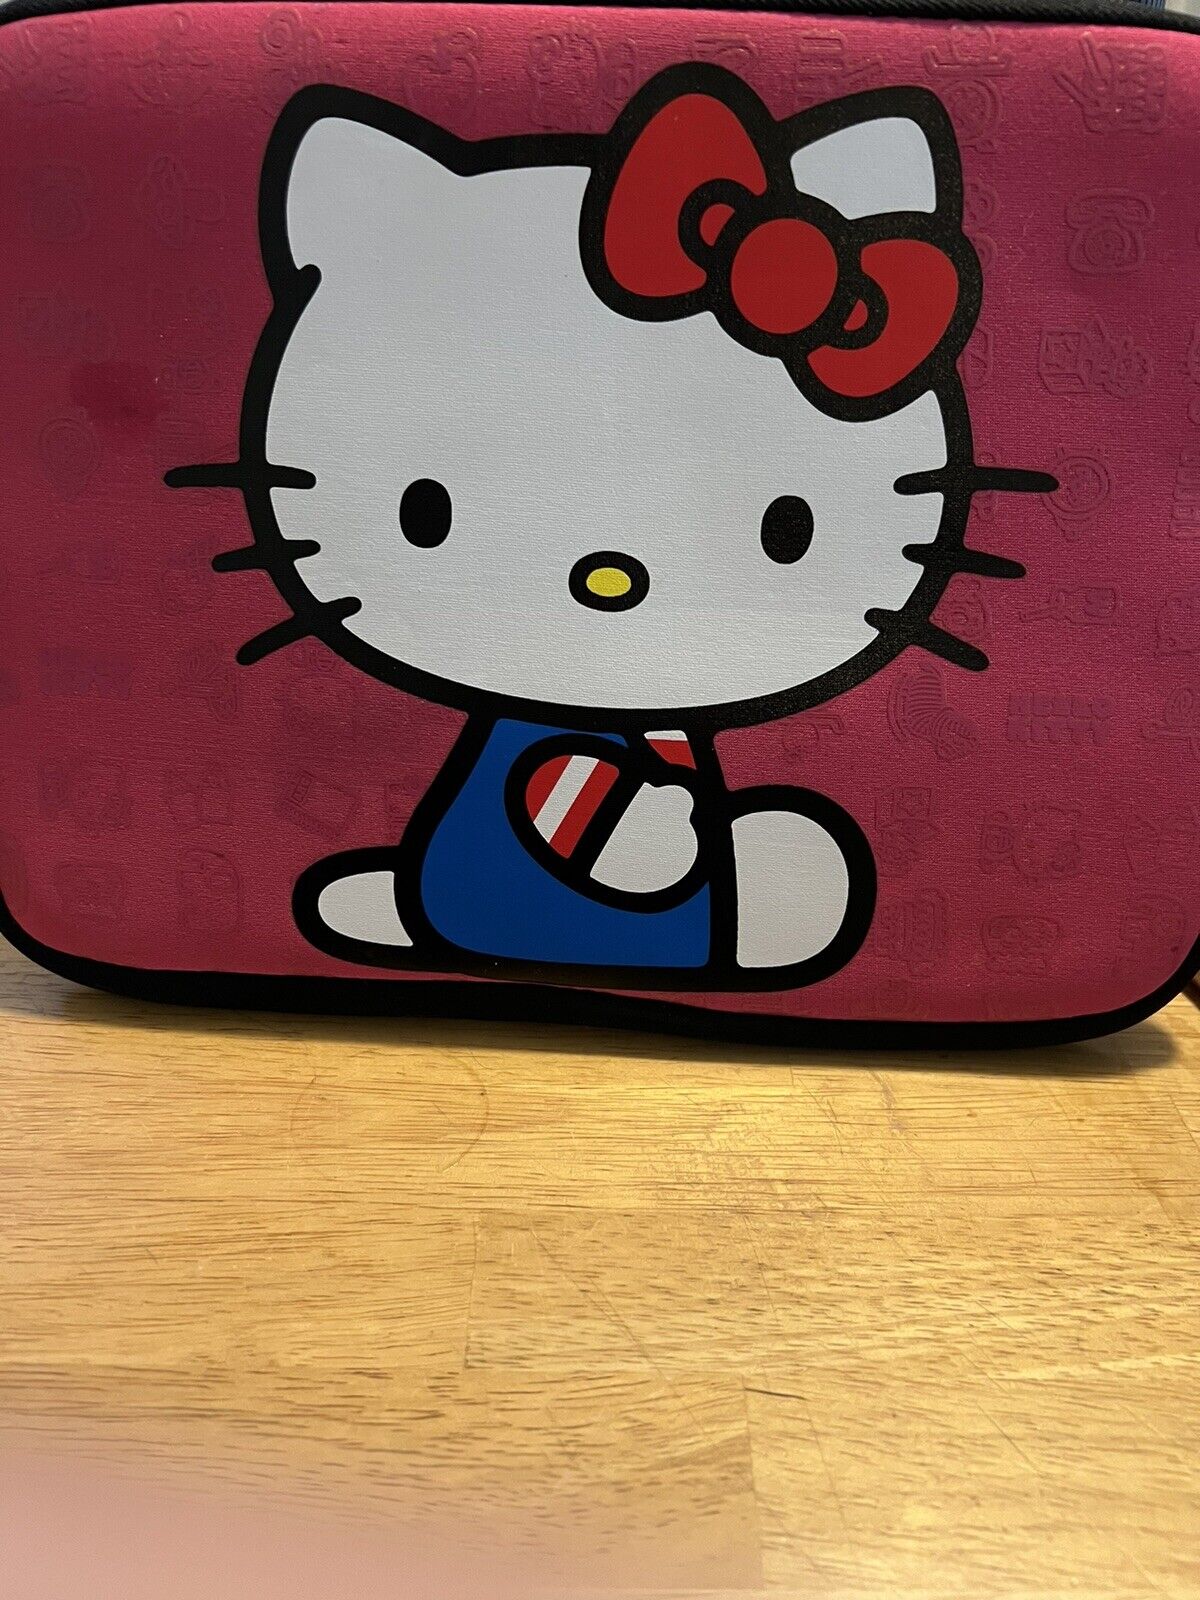 PREOWNED UNUSED HELLO KITTY TABLET CASE WITH FOAM INSERT